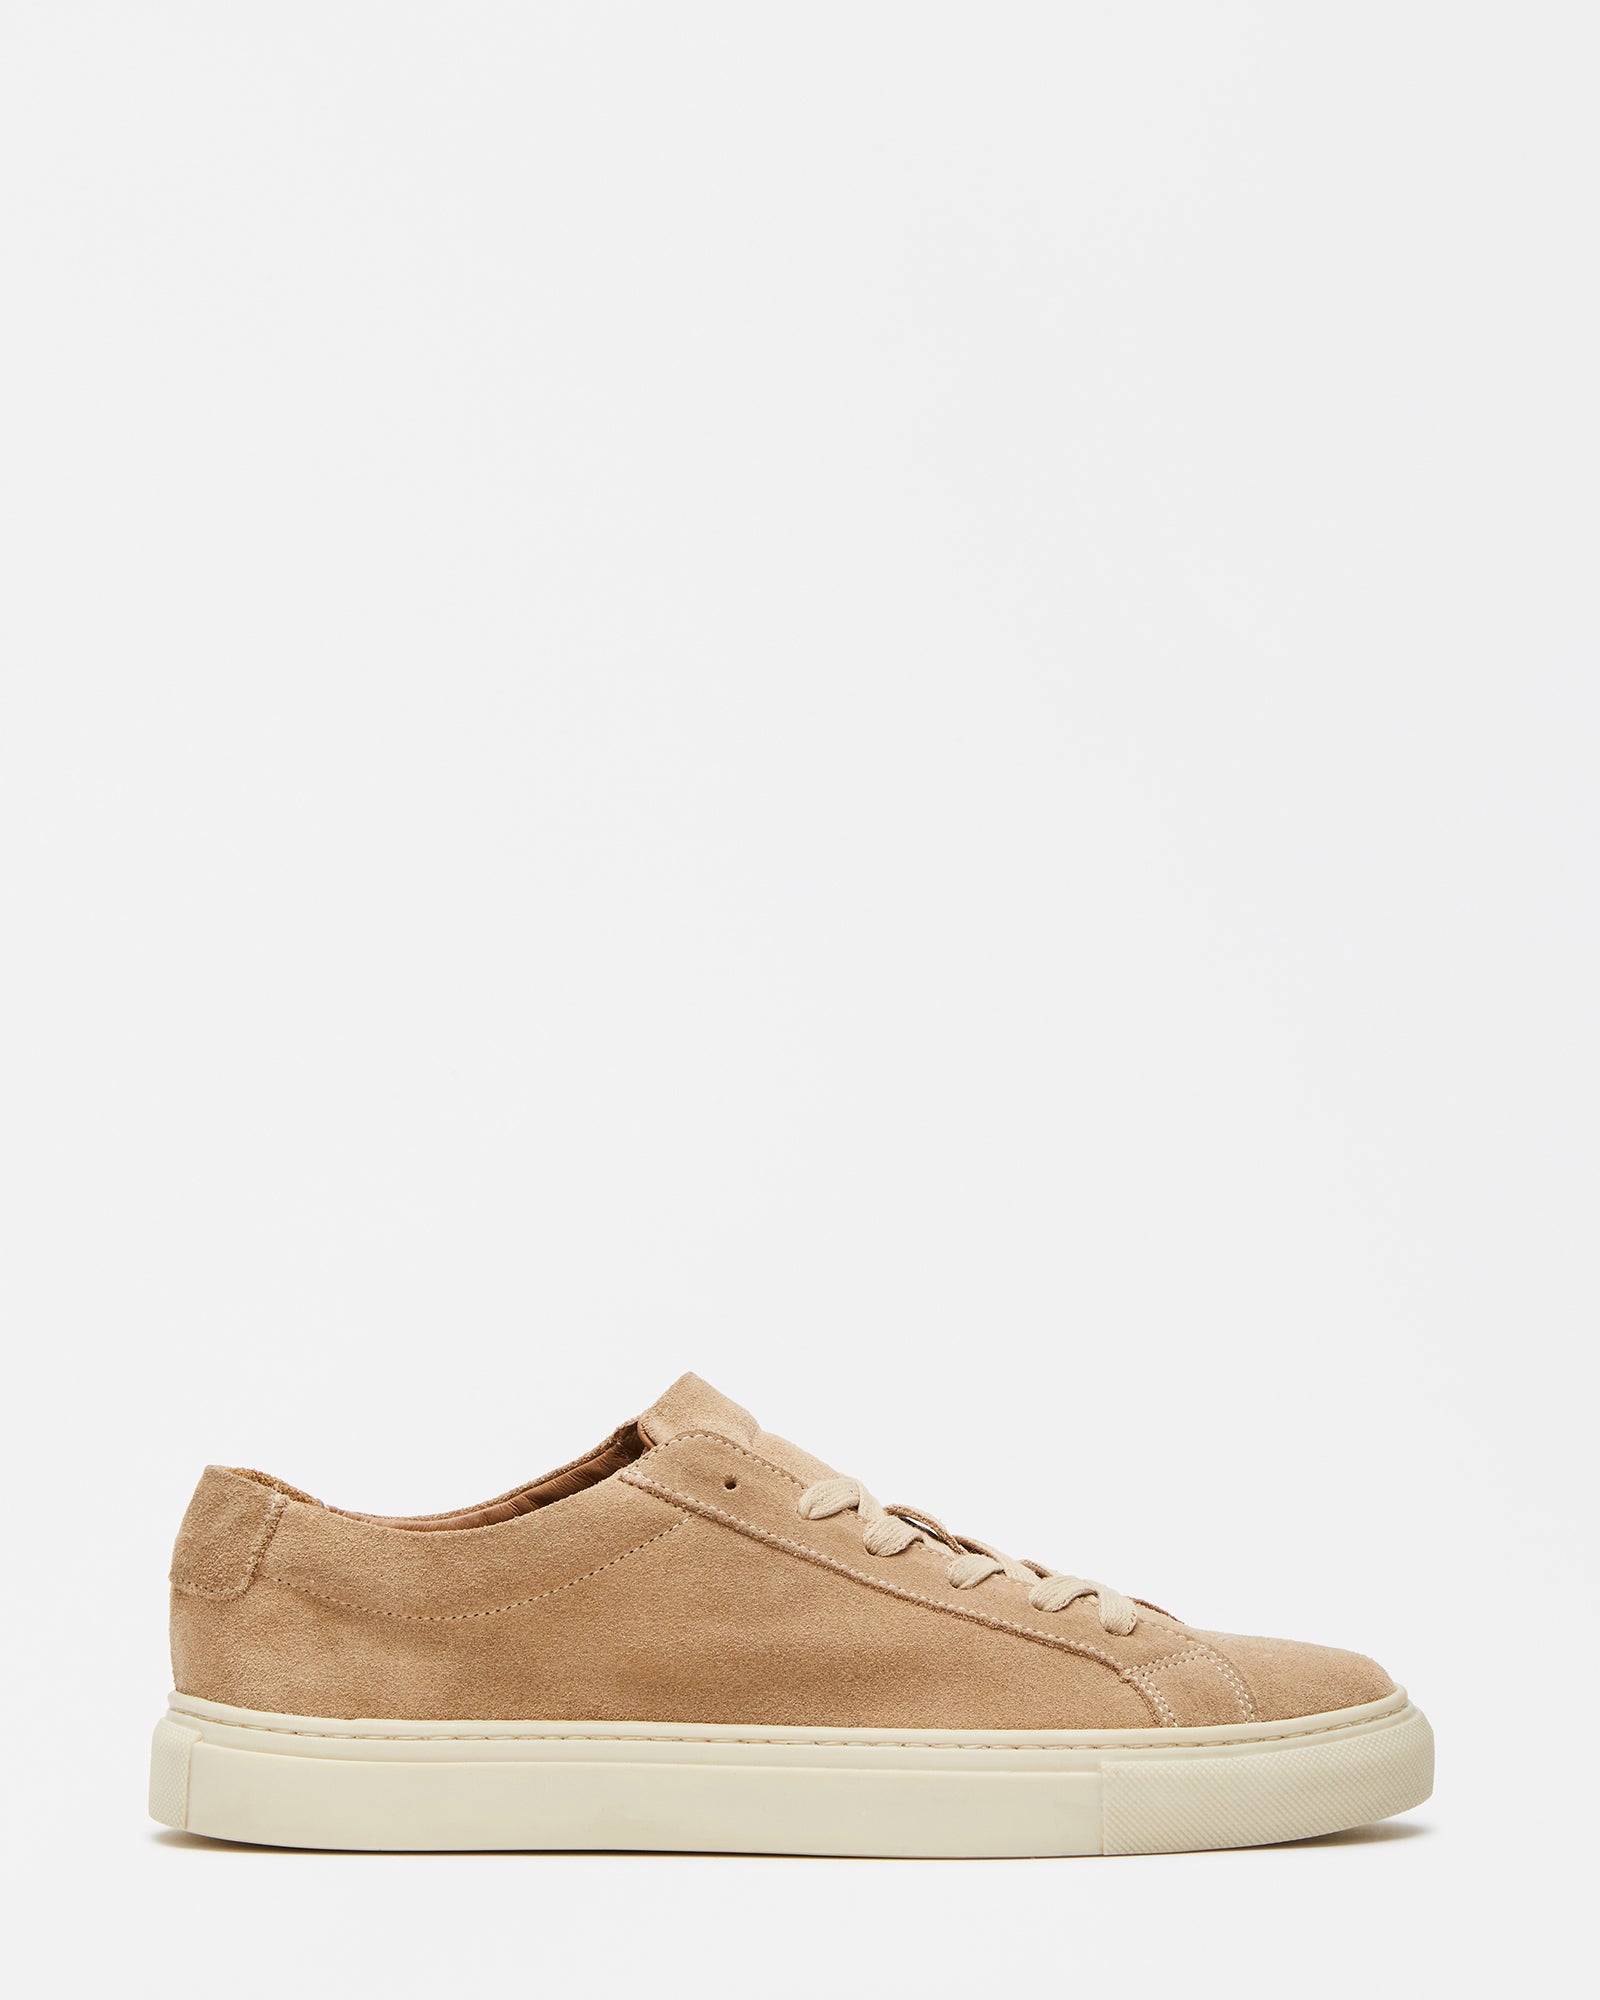 Steve Madden BOLO SAND SUEDE